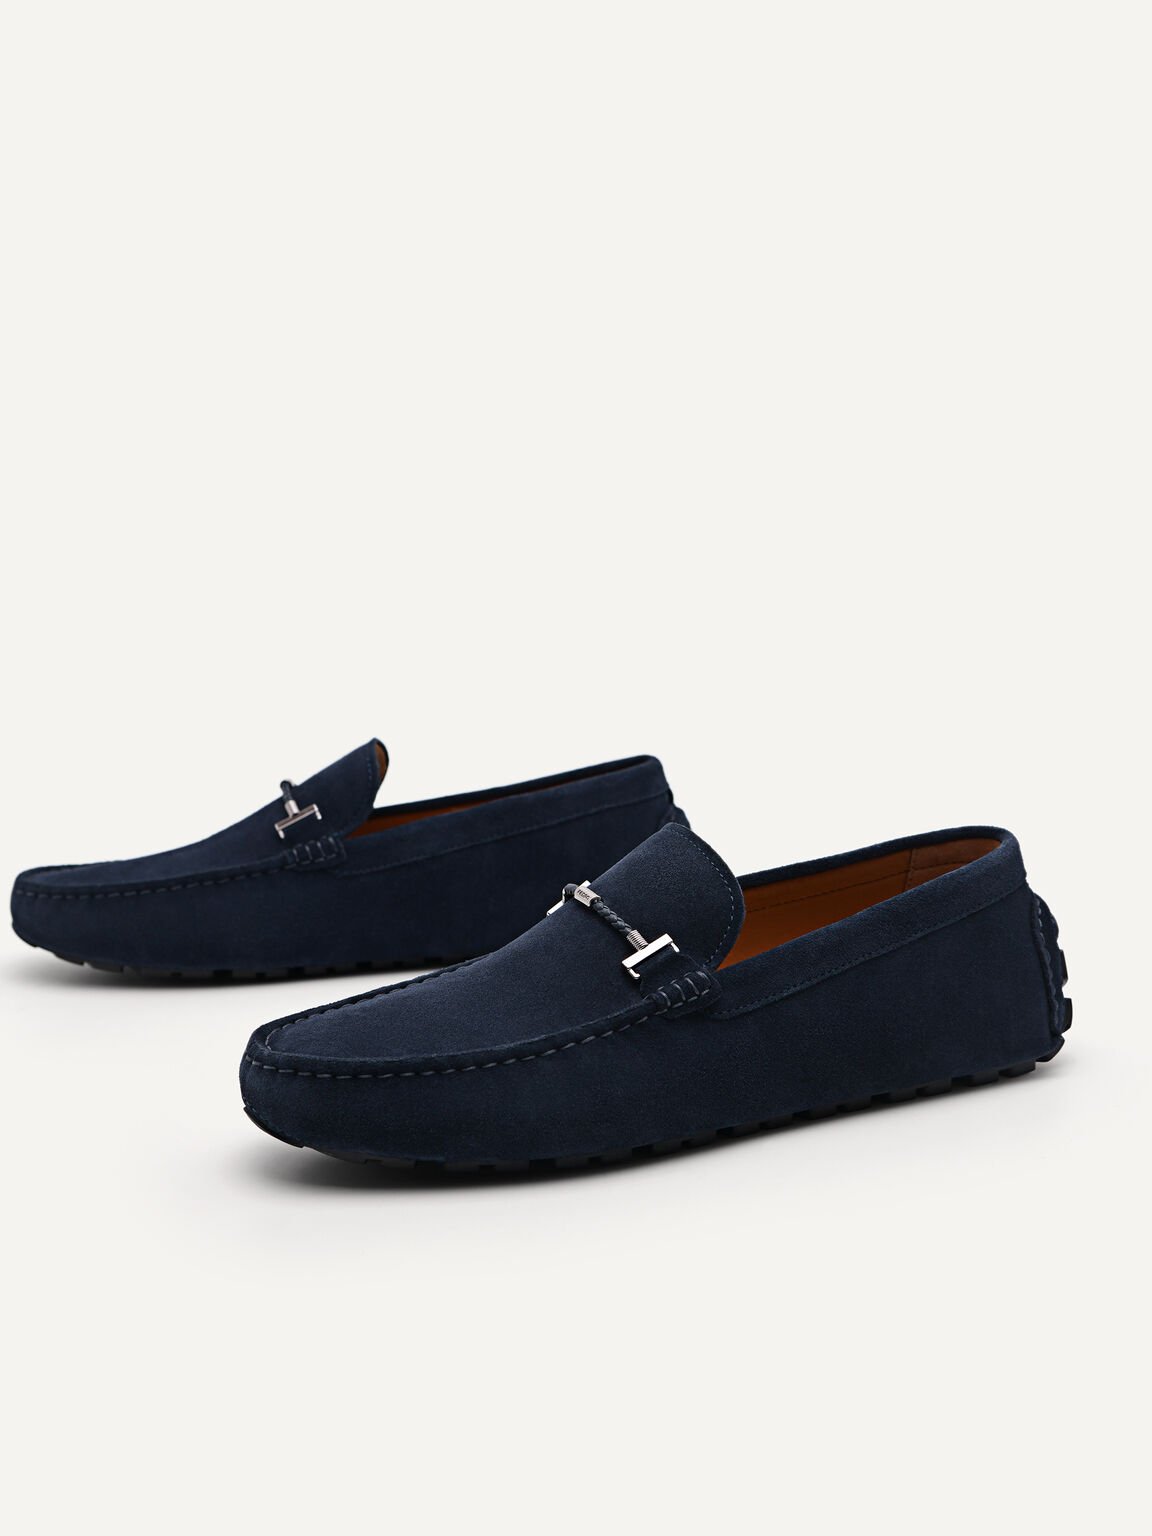 Suede Leather Moccasins, Navy